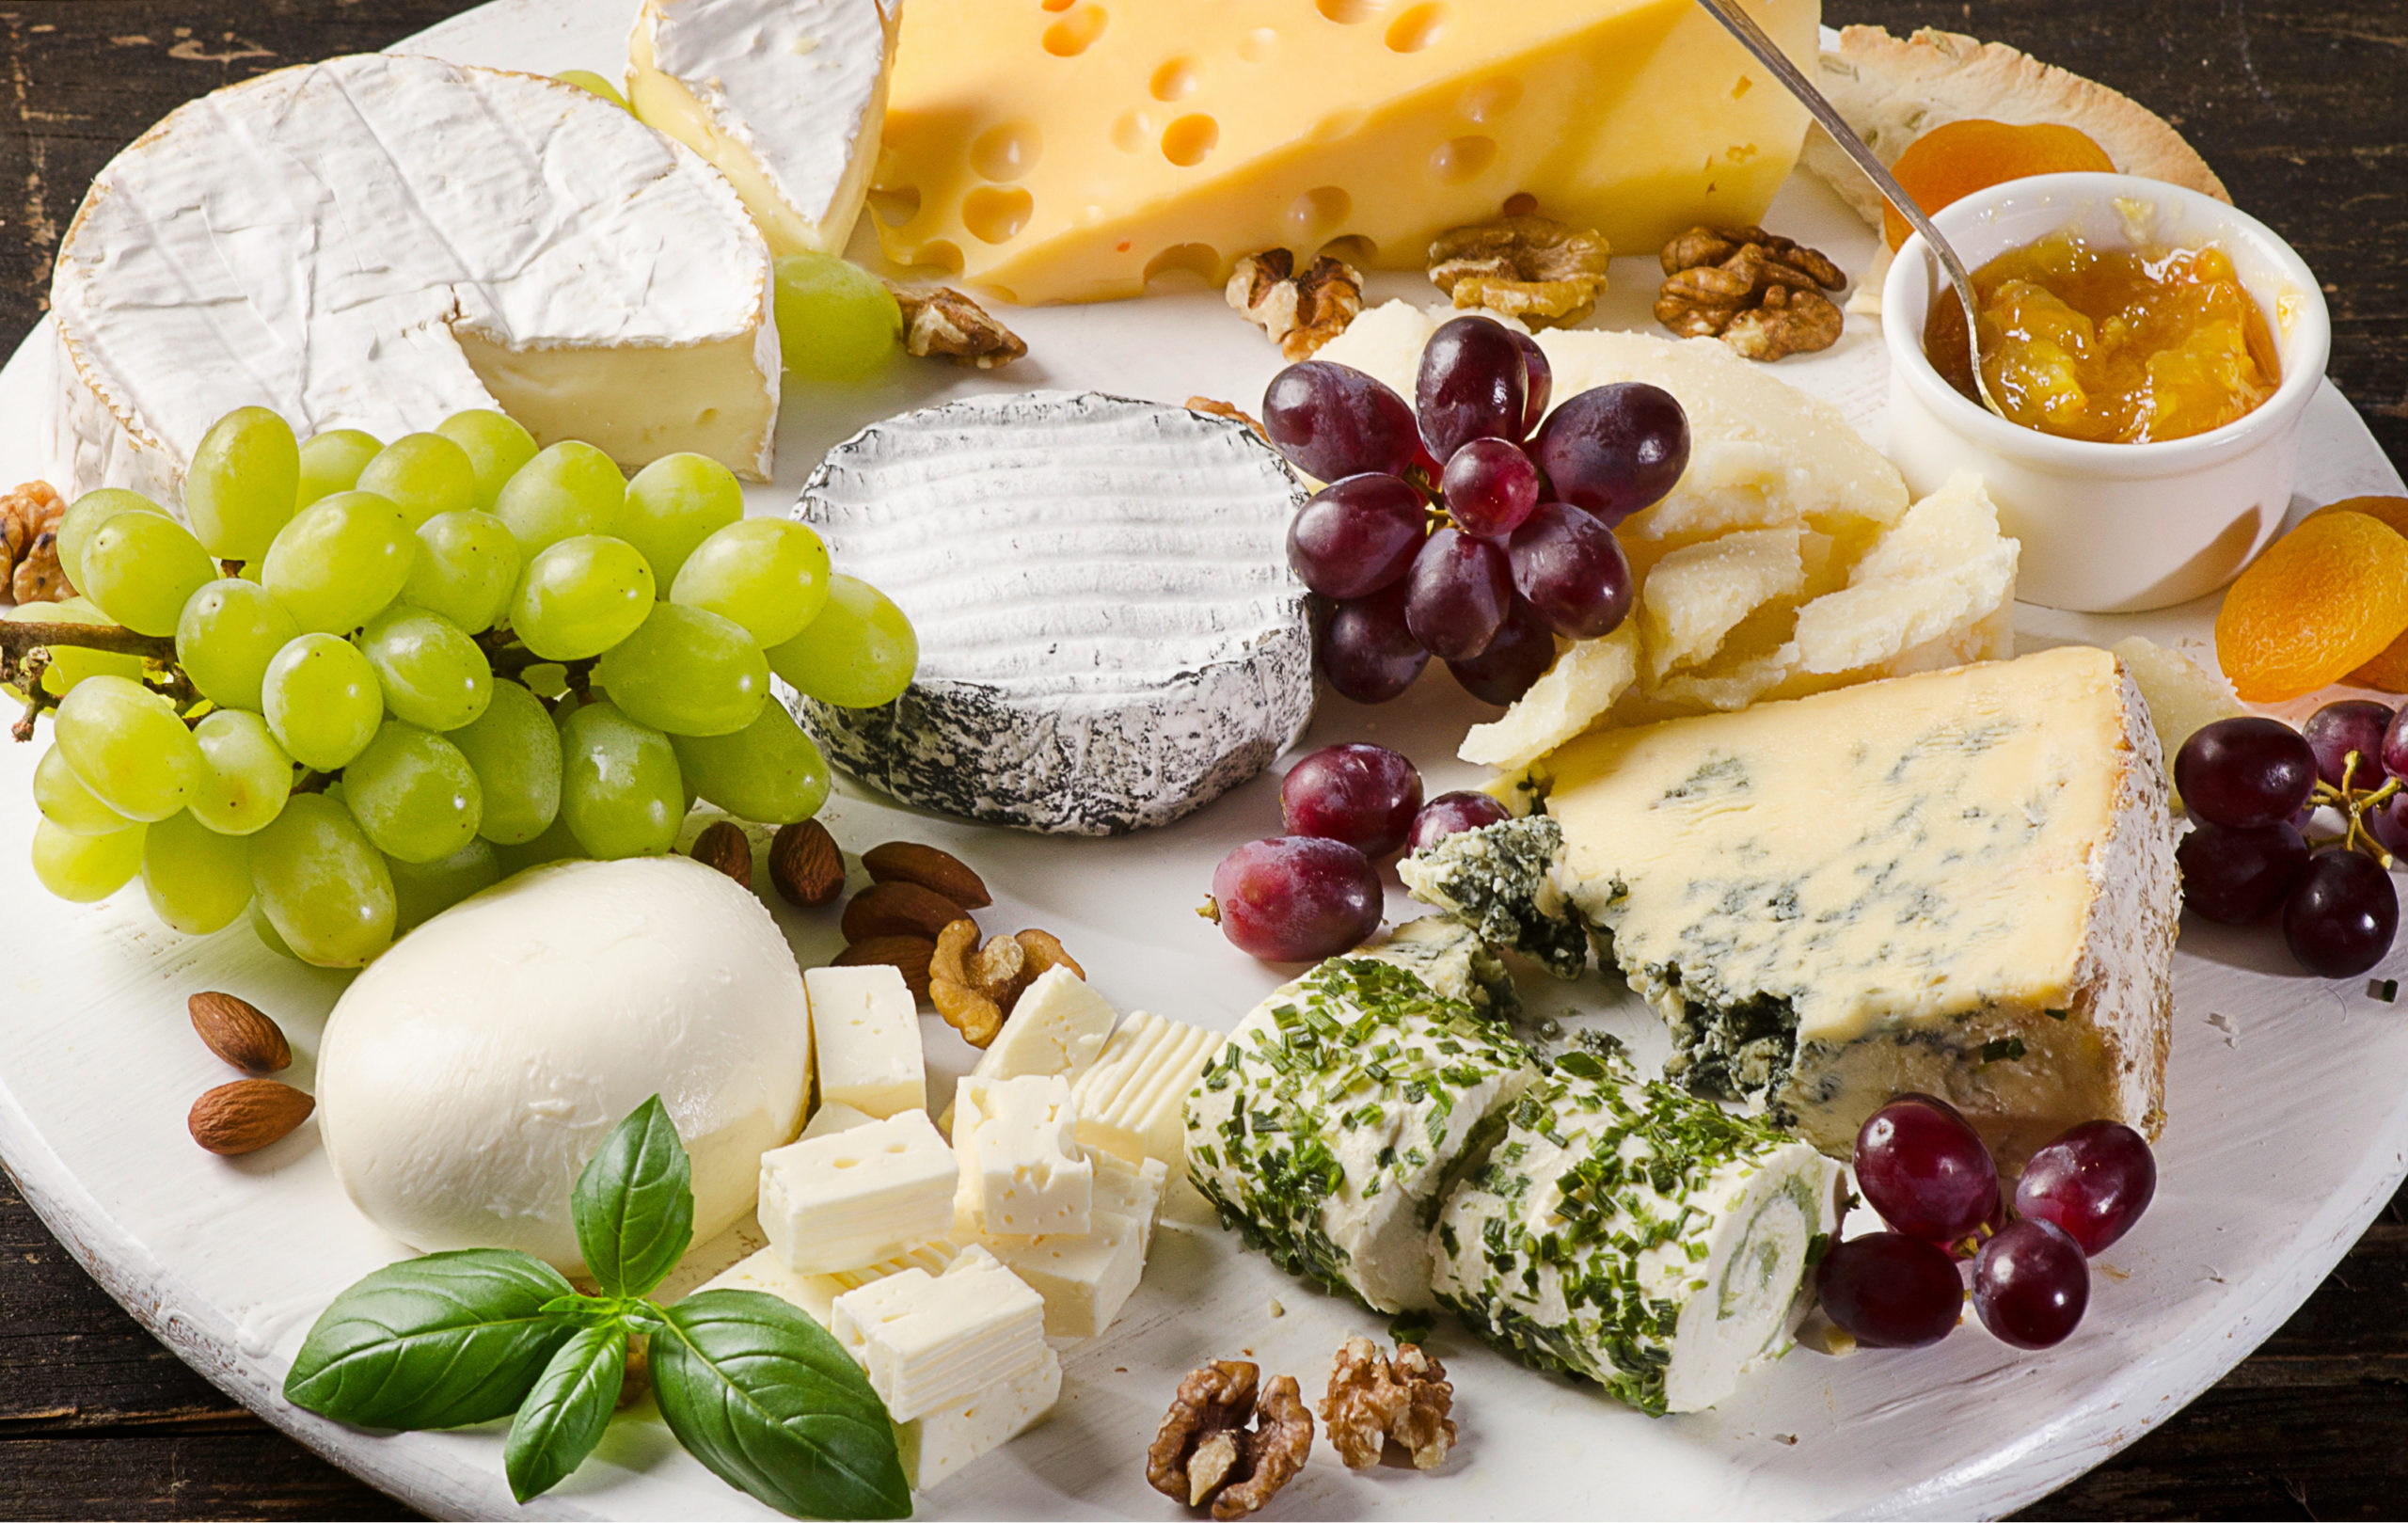 Read more about the article Here’s How Cheese Causes Headaches with Tyramine